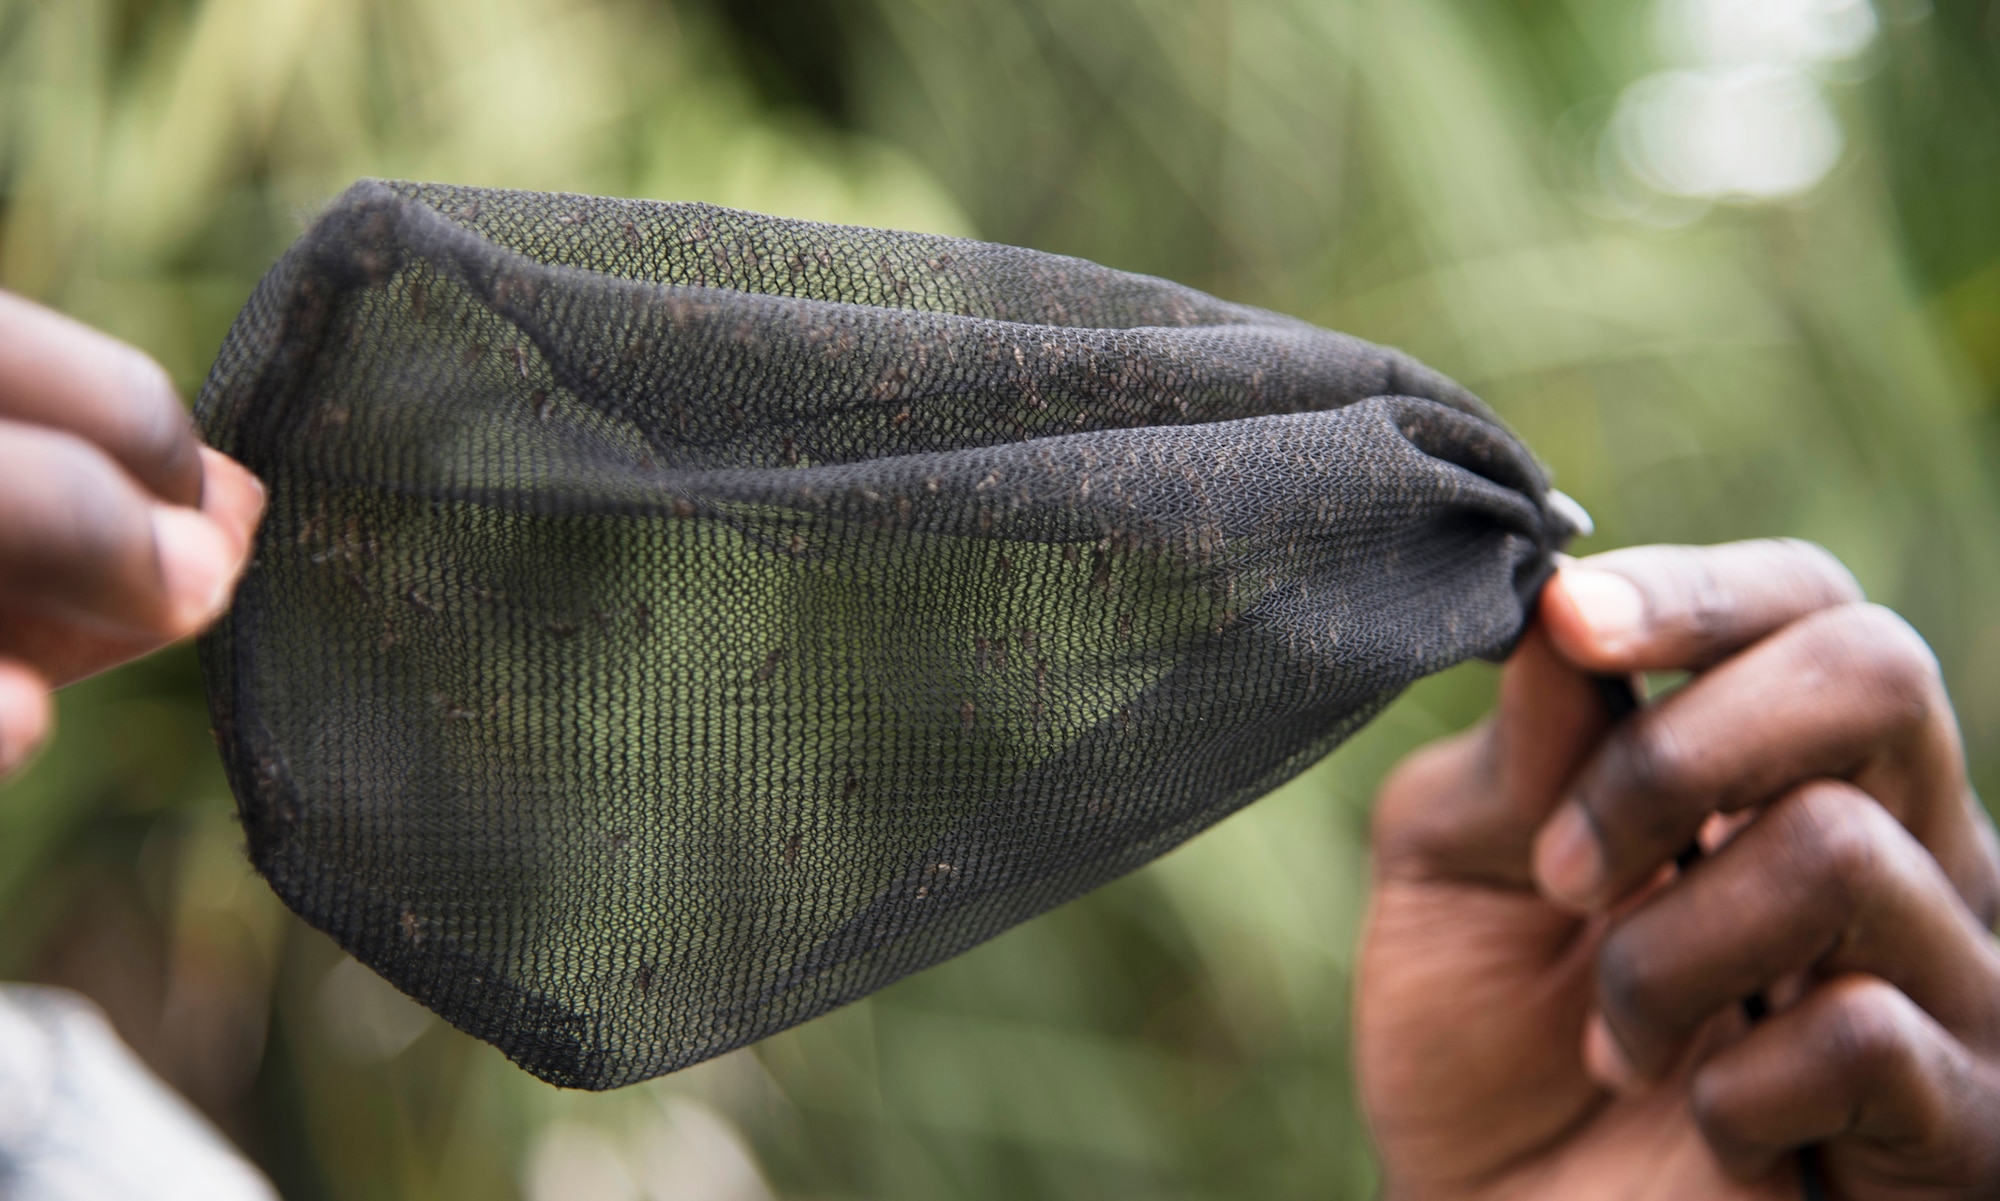 U.S. Air Force Staff Sgt. Cornelius Bransah, the NCO in charge of food safety and sanitation assigned to the 6th Aerospace Medical Squadron, holds a net containing more than 100 mosquitoes at MacDill Air Force Base, Fla., June 13, 2017. After trapping the mosquitoes, Bransah will freeze them, hand count them, and send the data he collects to MacDill and Hillsborough County Pest Management. (U.S. Air Force photo by Airman 1st Class Adam R. Shanks)